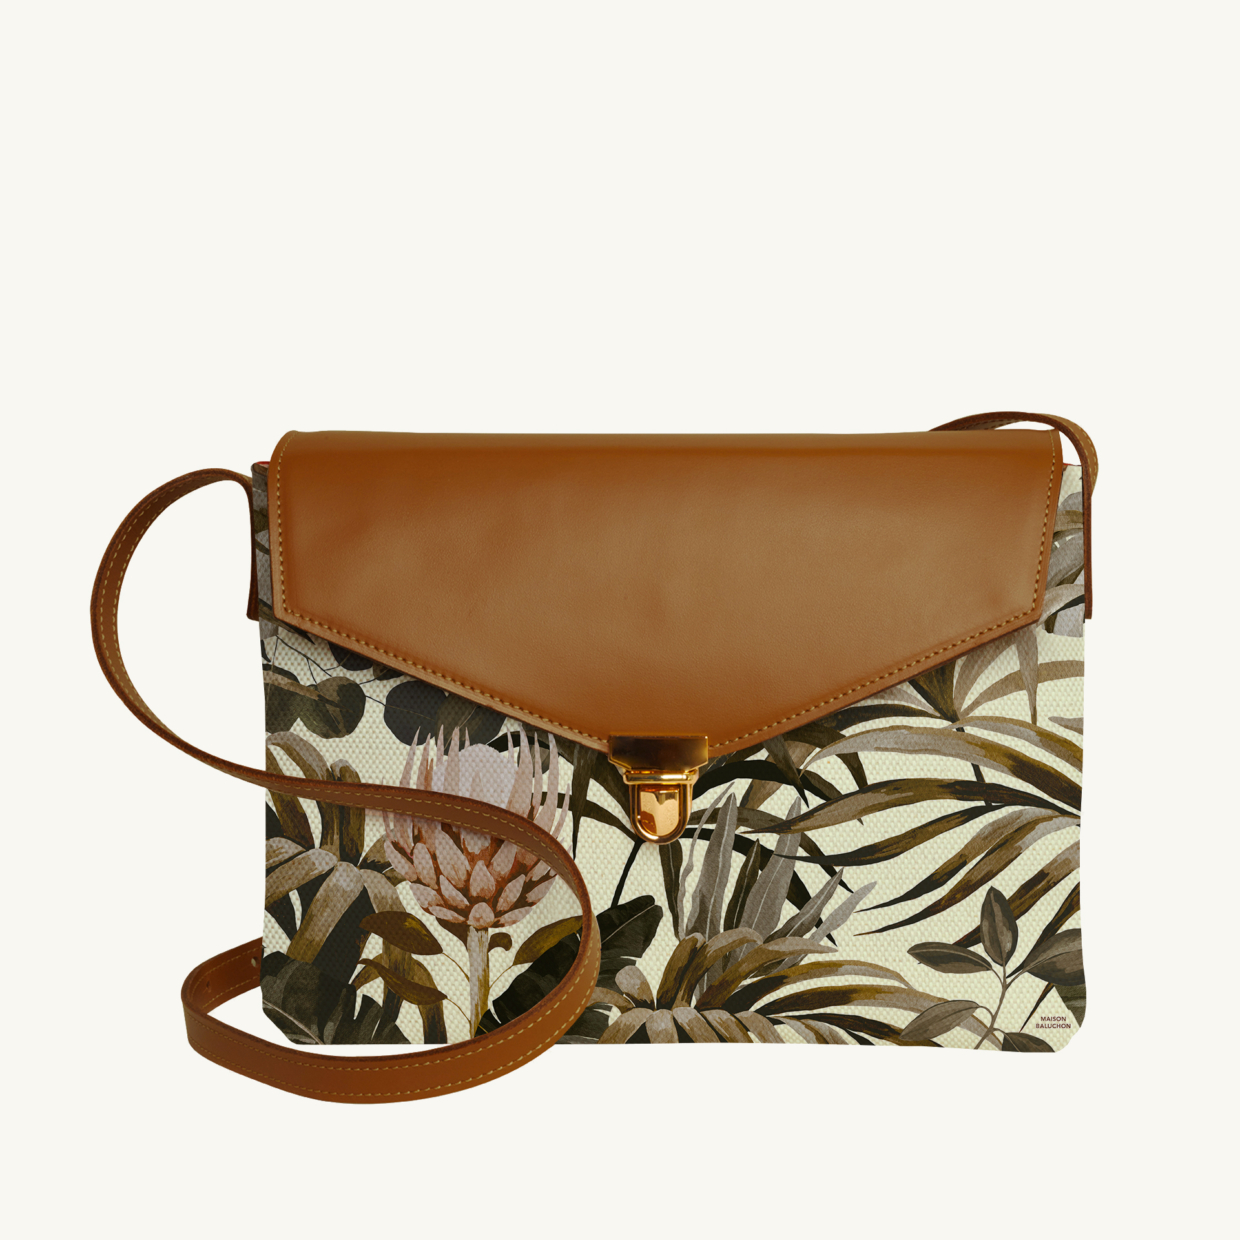 Purse Tropical N°14 - Camel leather